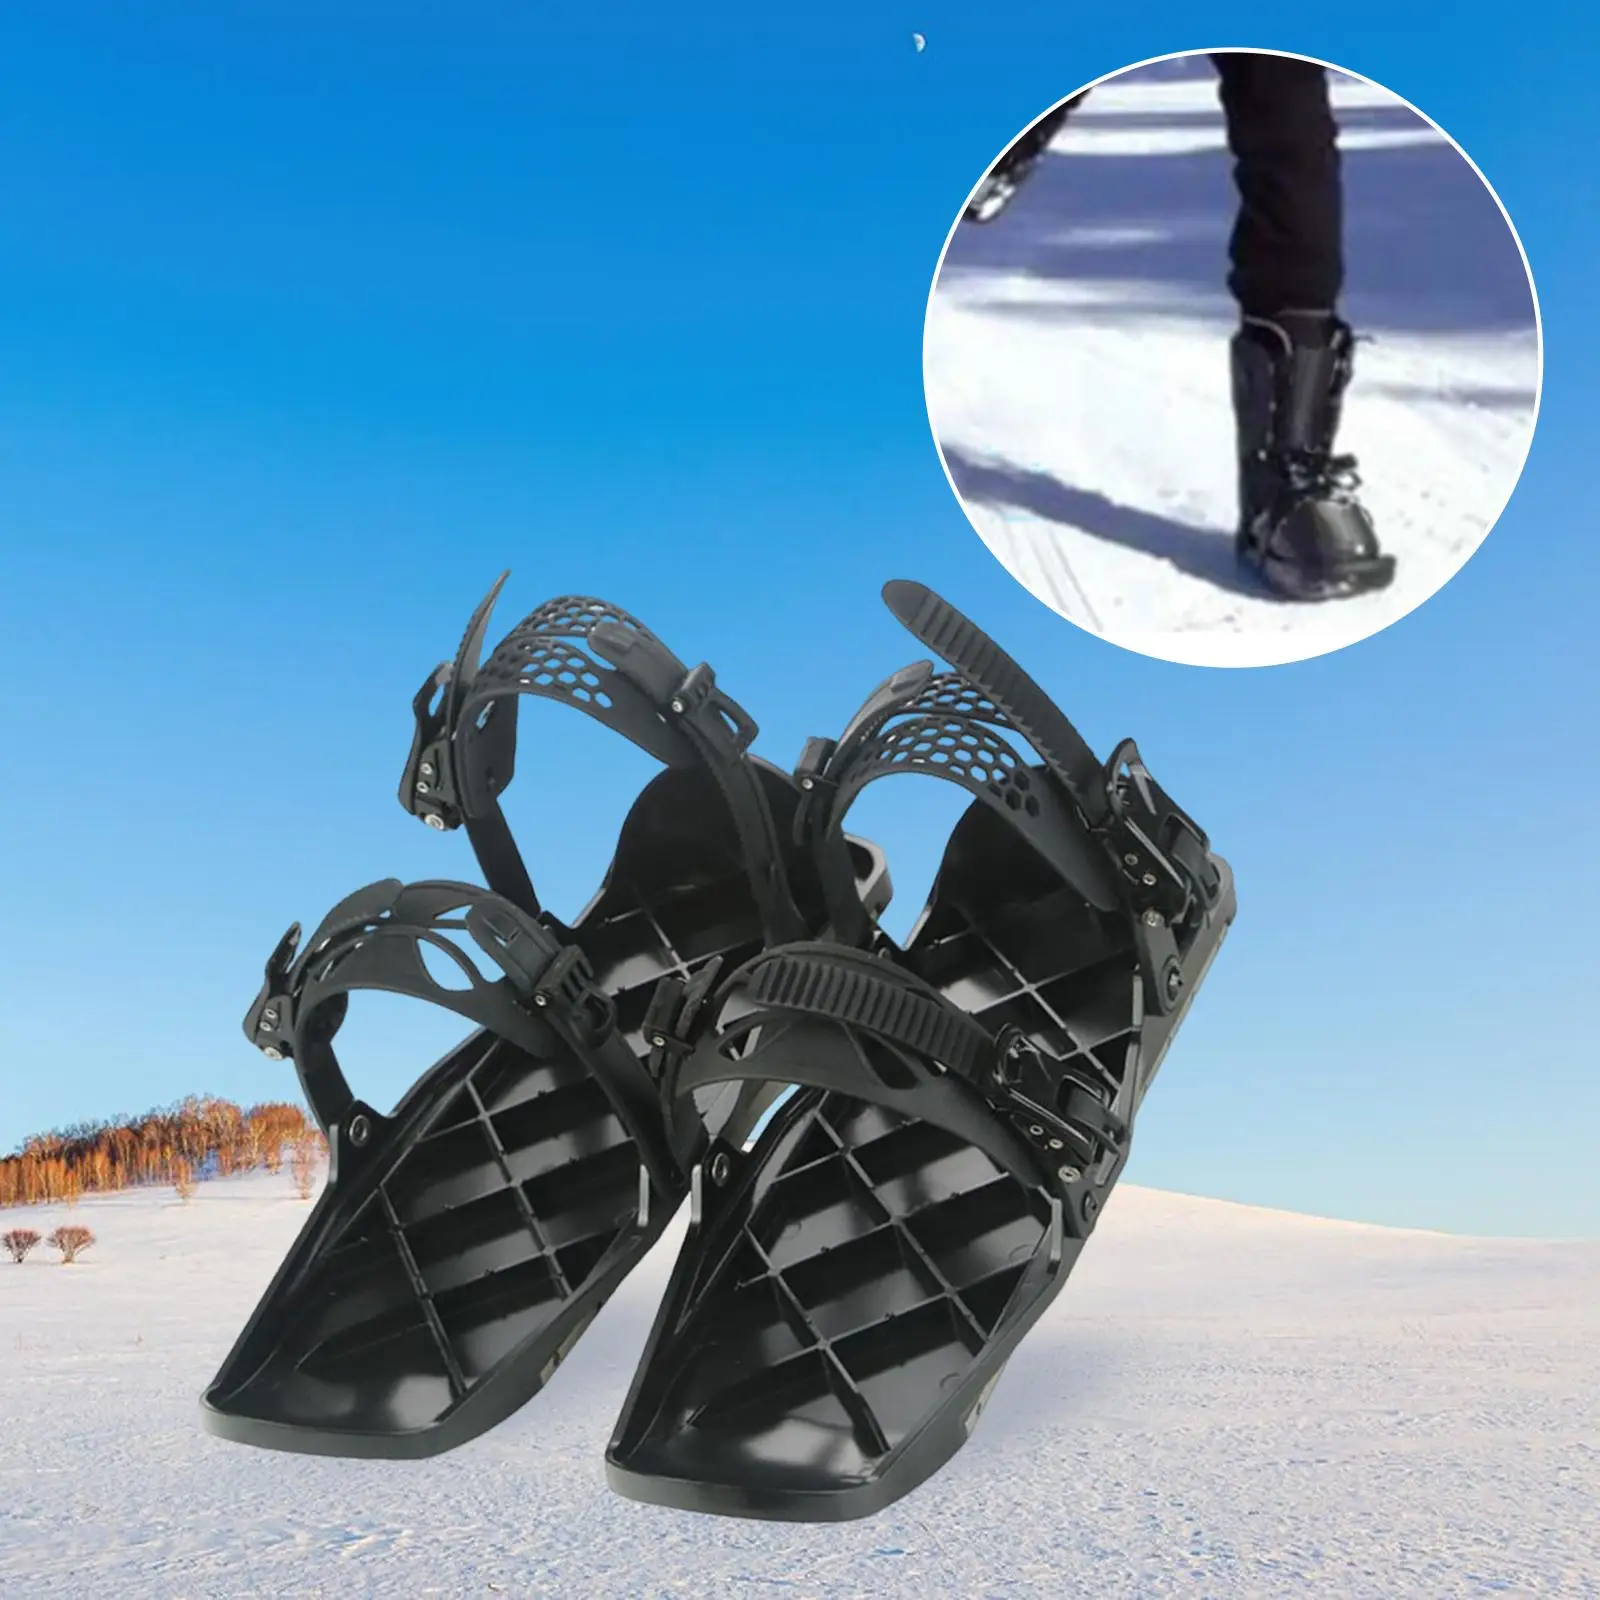 Winter Snowblades Skis Shoes Durable Stable Easy to Use Ski Boots for Outdoor Activities Hiking Trails Children Adults Beginner